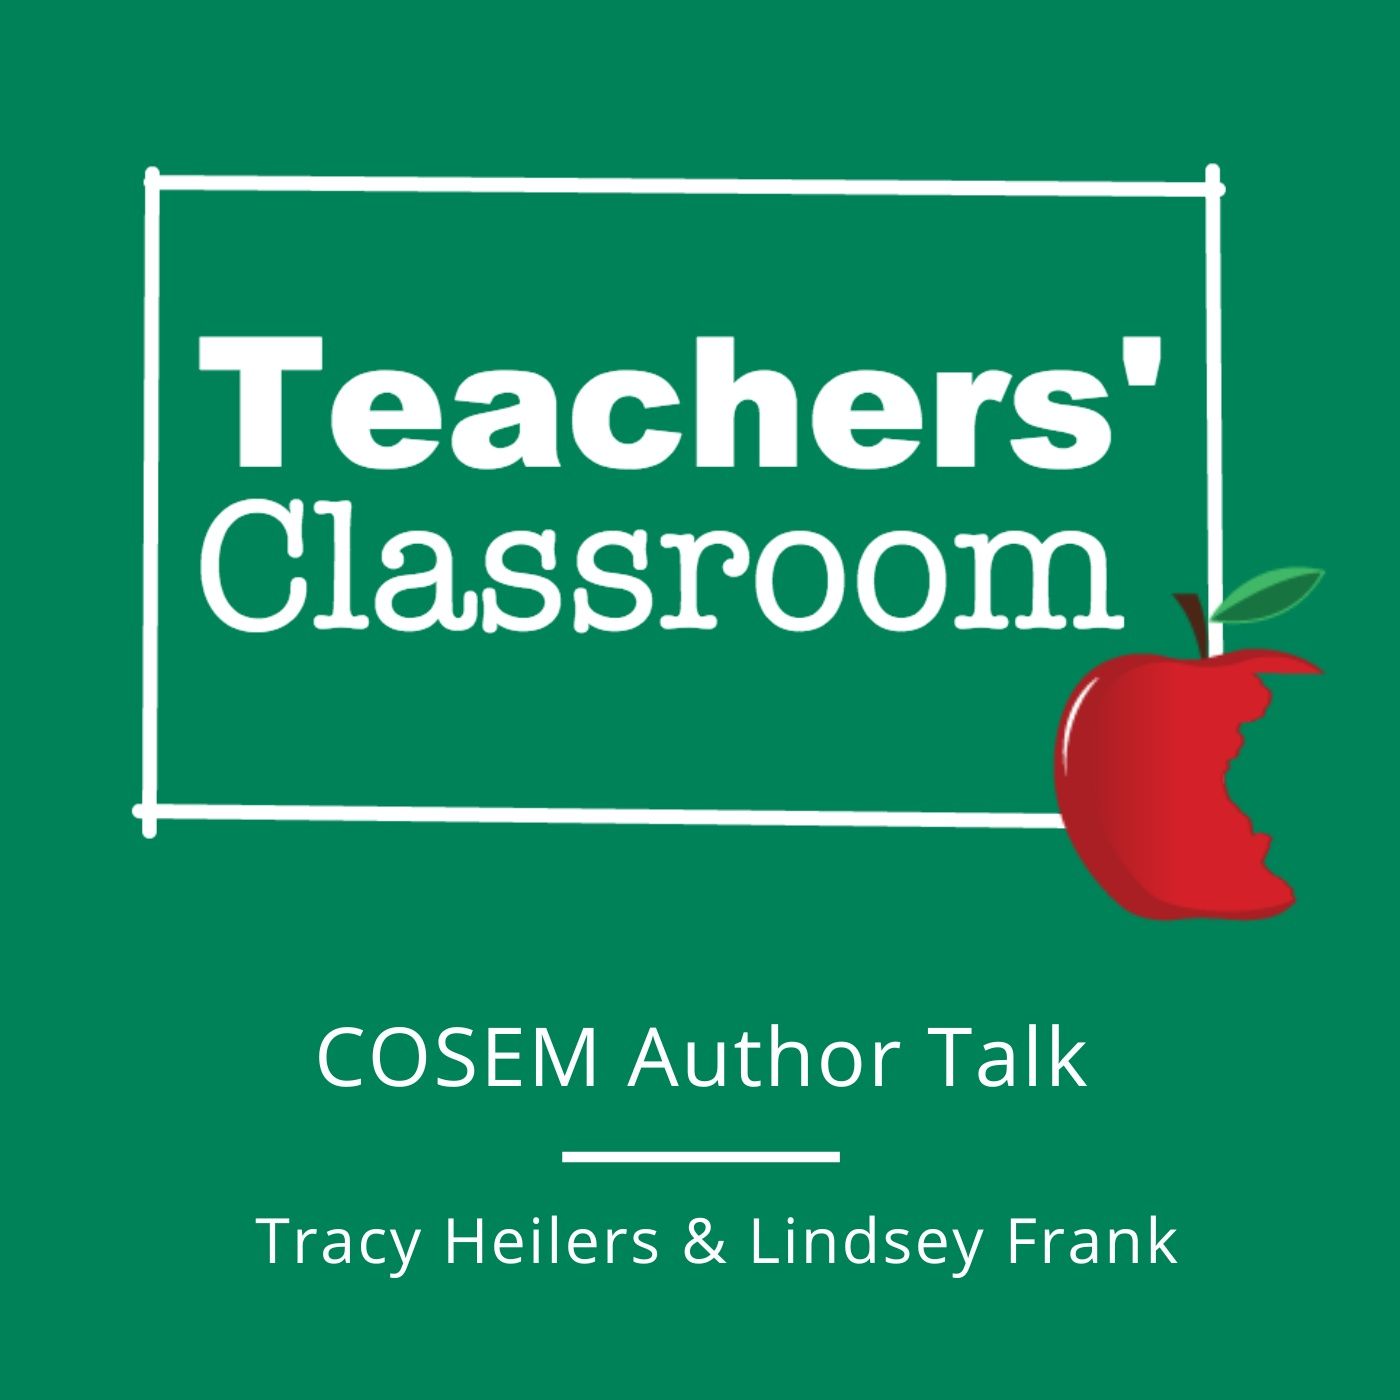 COSEM Book Author Talk with Tracy Heilers and Lindsey Frank